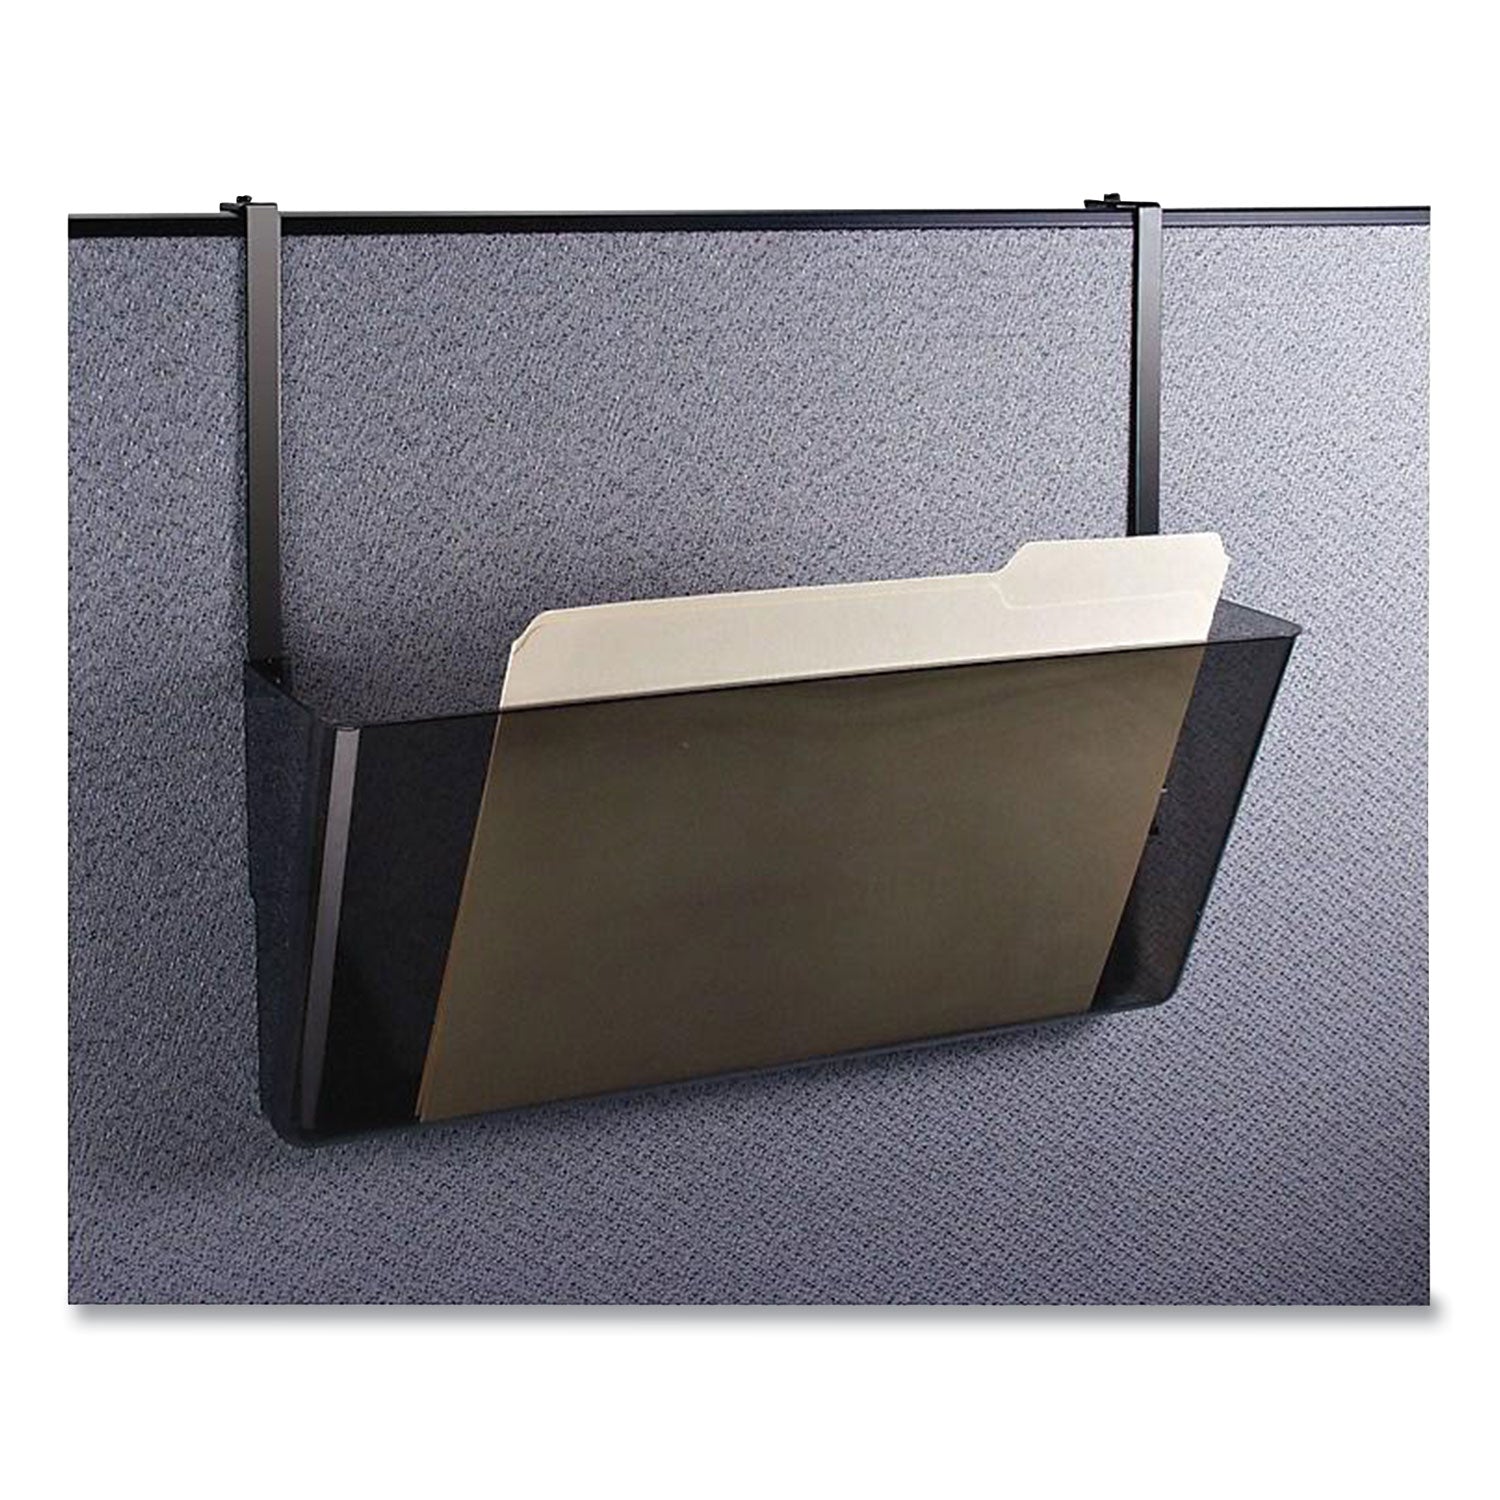 plastic-wall-file-pocket-one-pocket-legal-letter-size-1619-x-413-x-7-smoke_oic21441 - 2